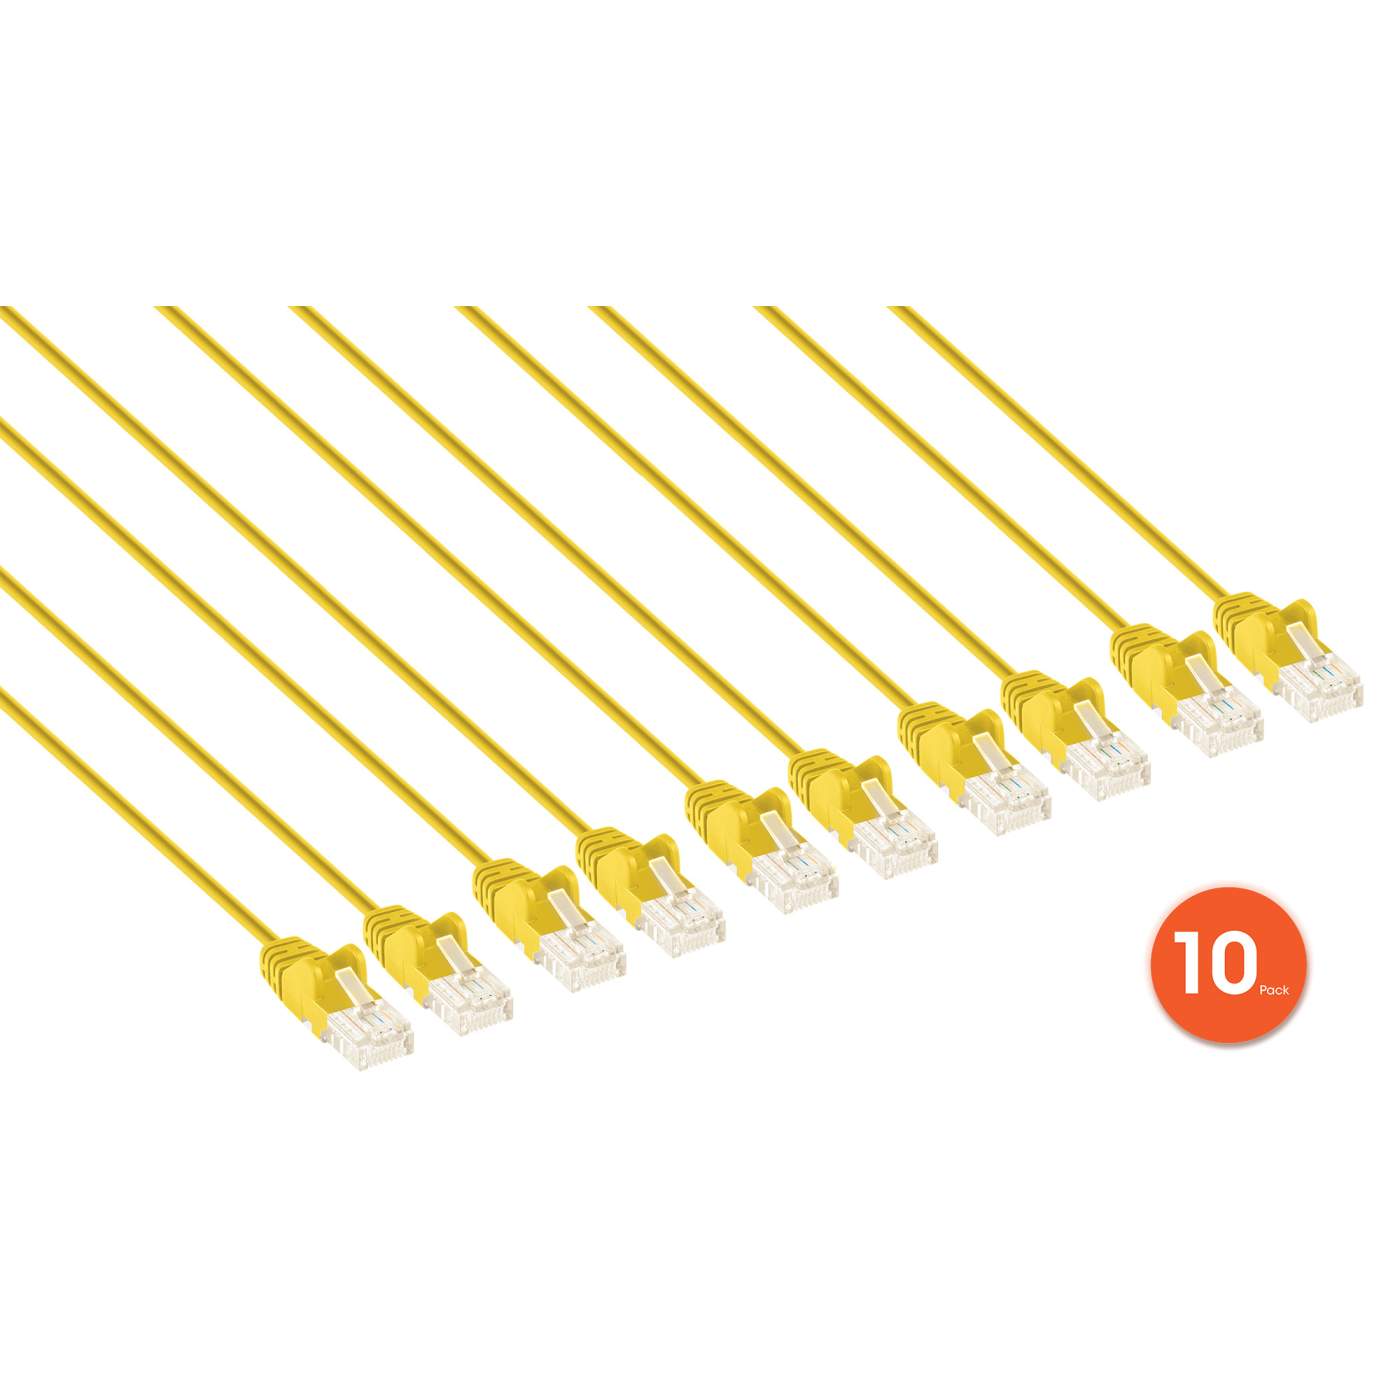 Cat6 U/UTP Slim Network Patch Cable, 5 ft., Yellow, 10-Pack Image 2